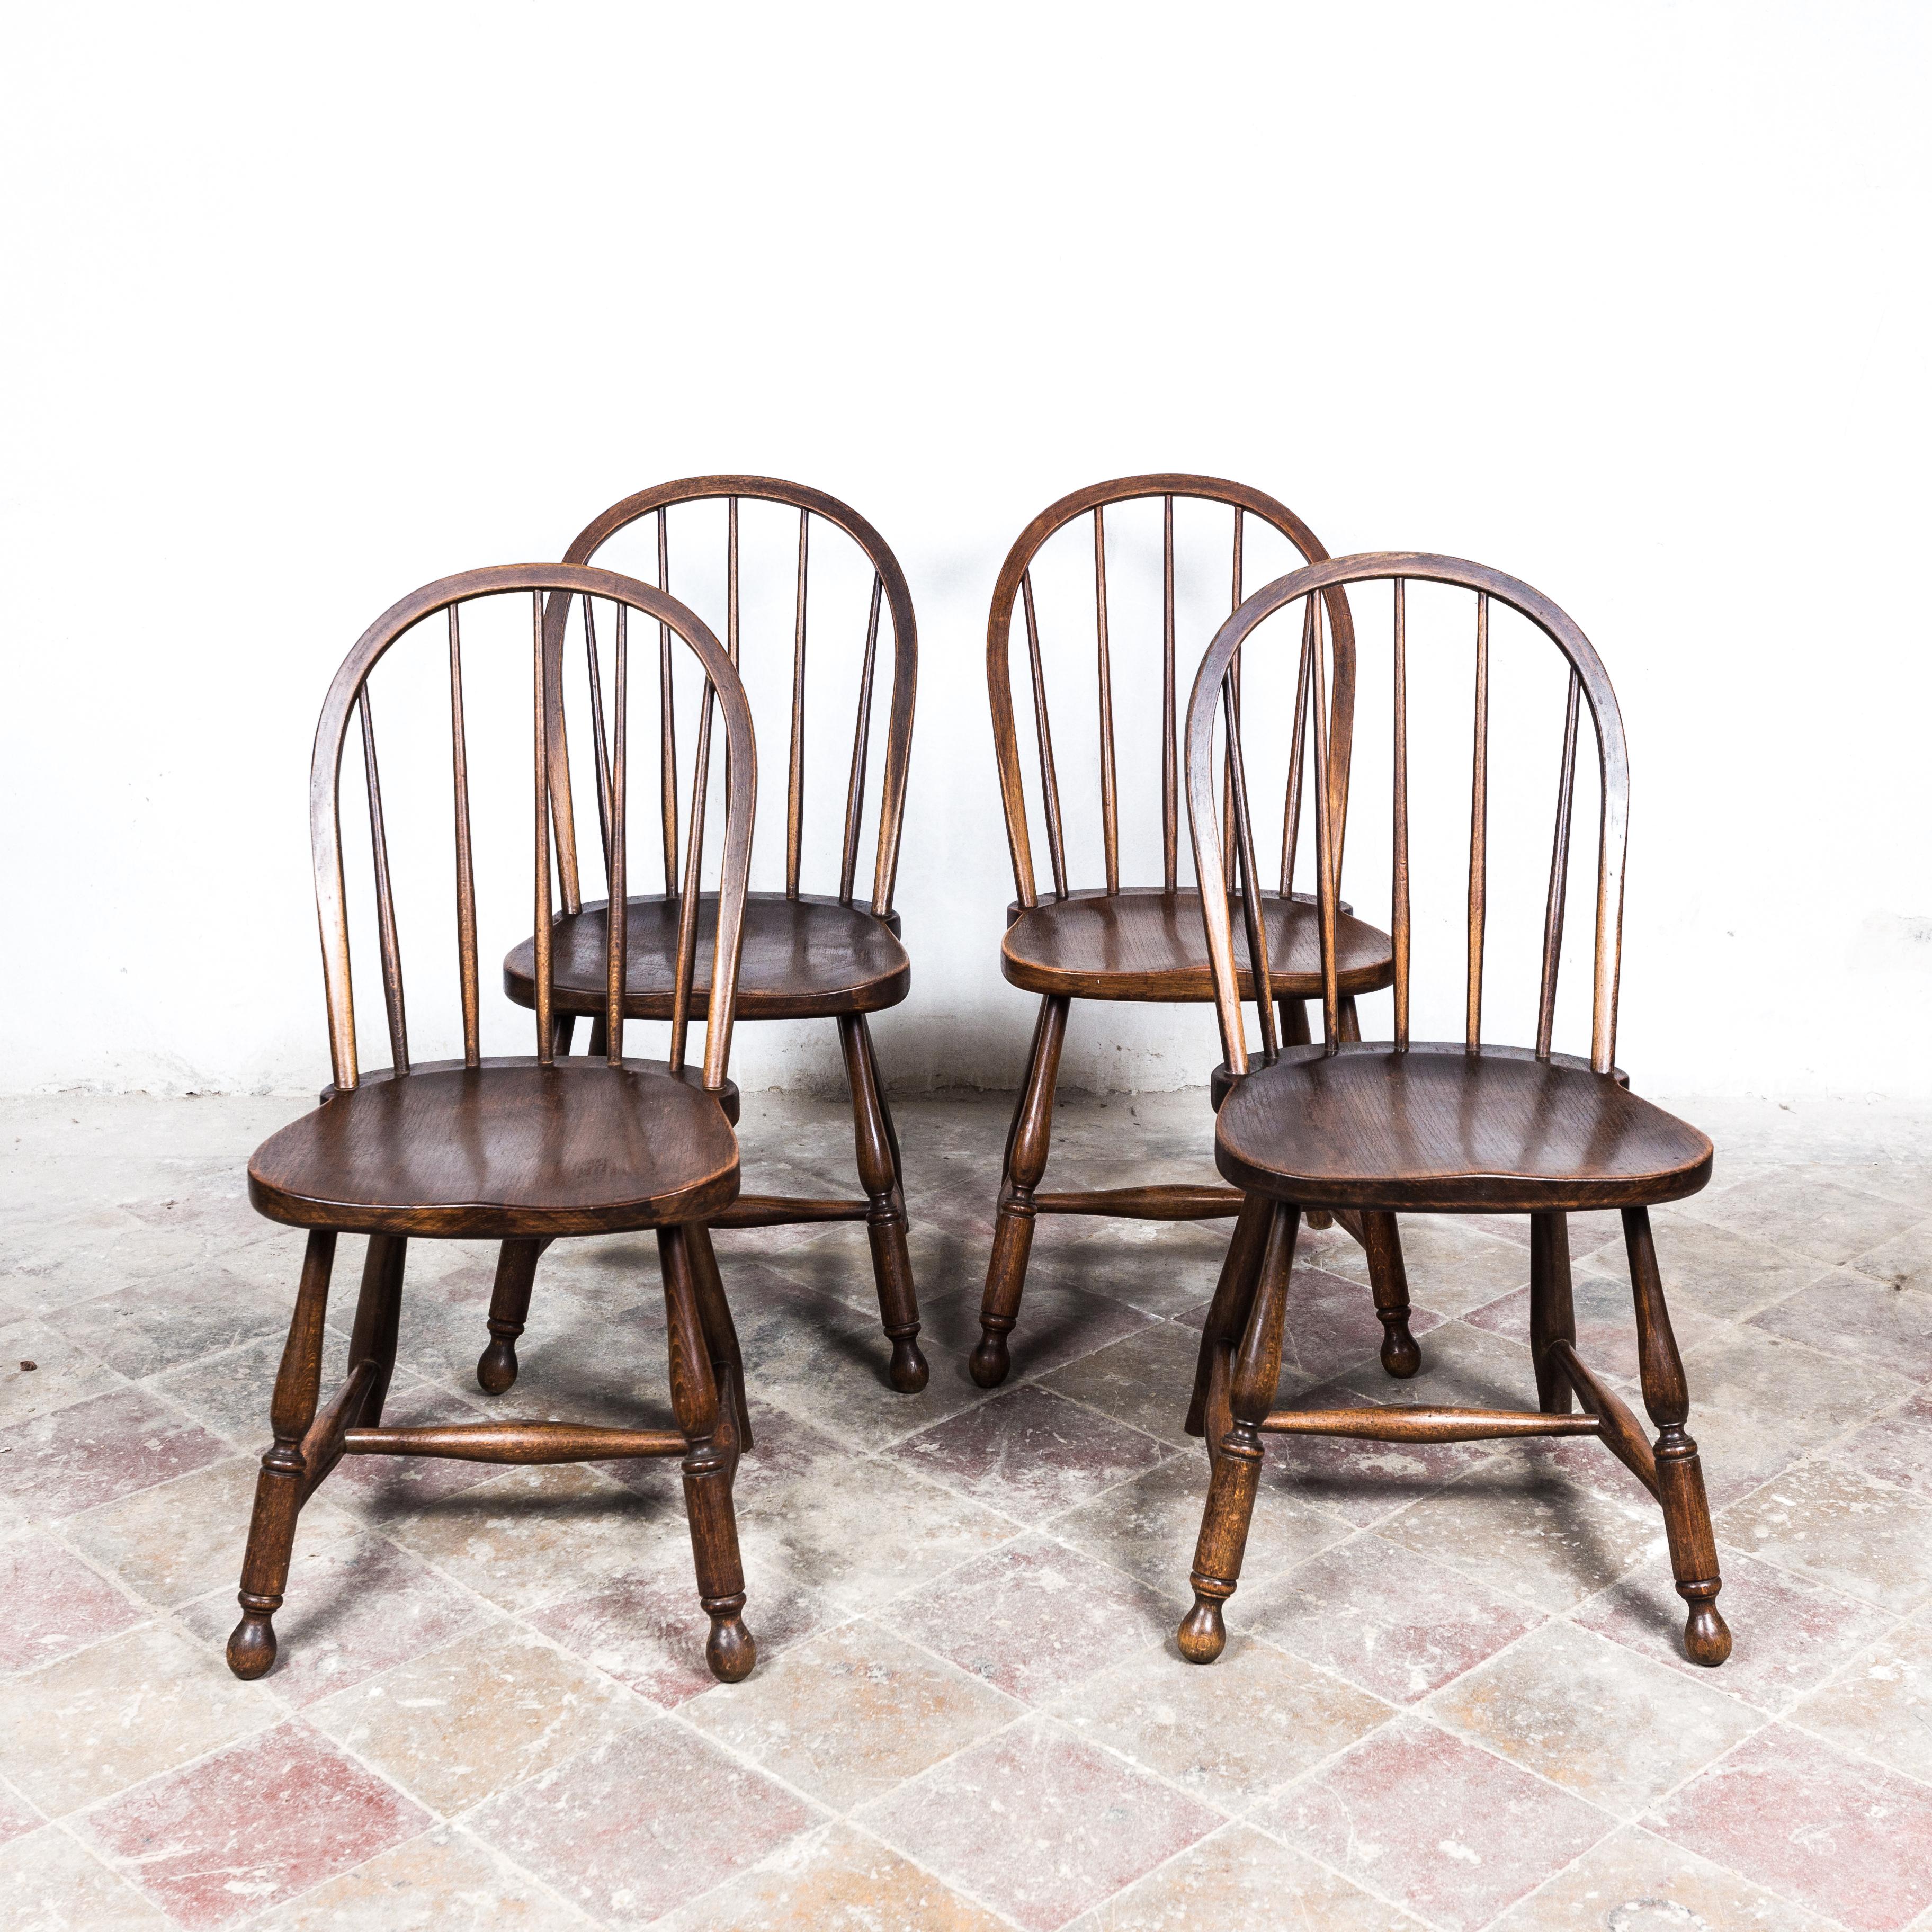 Extremely rare set of chairs designed by Josef Frank. This type of chairs was used by Adolf Loos for the kitchen of famous Villa Müller in Prague. Solid beech wood stained to imitate mahagony. In very good original condition. With embossed Thonet